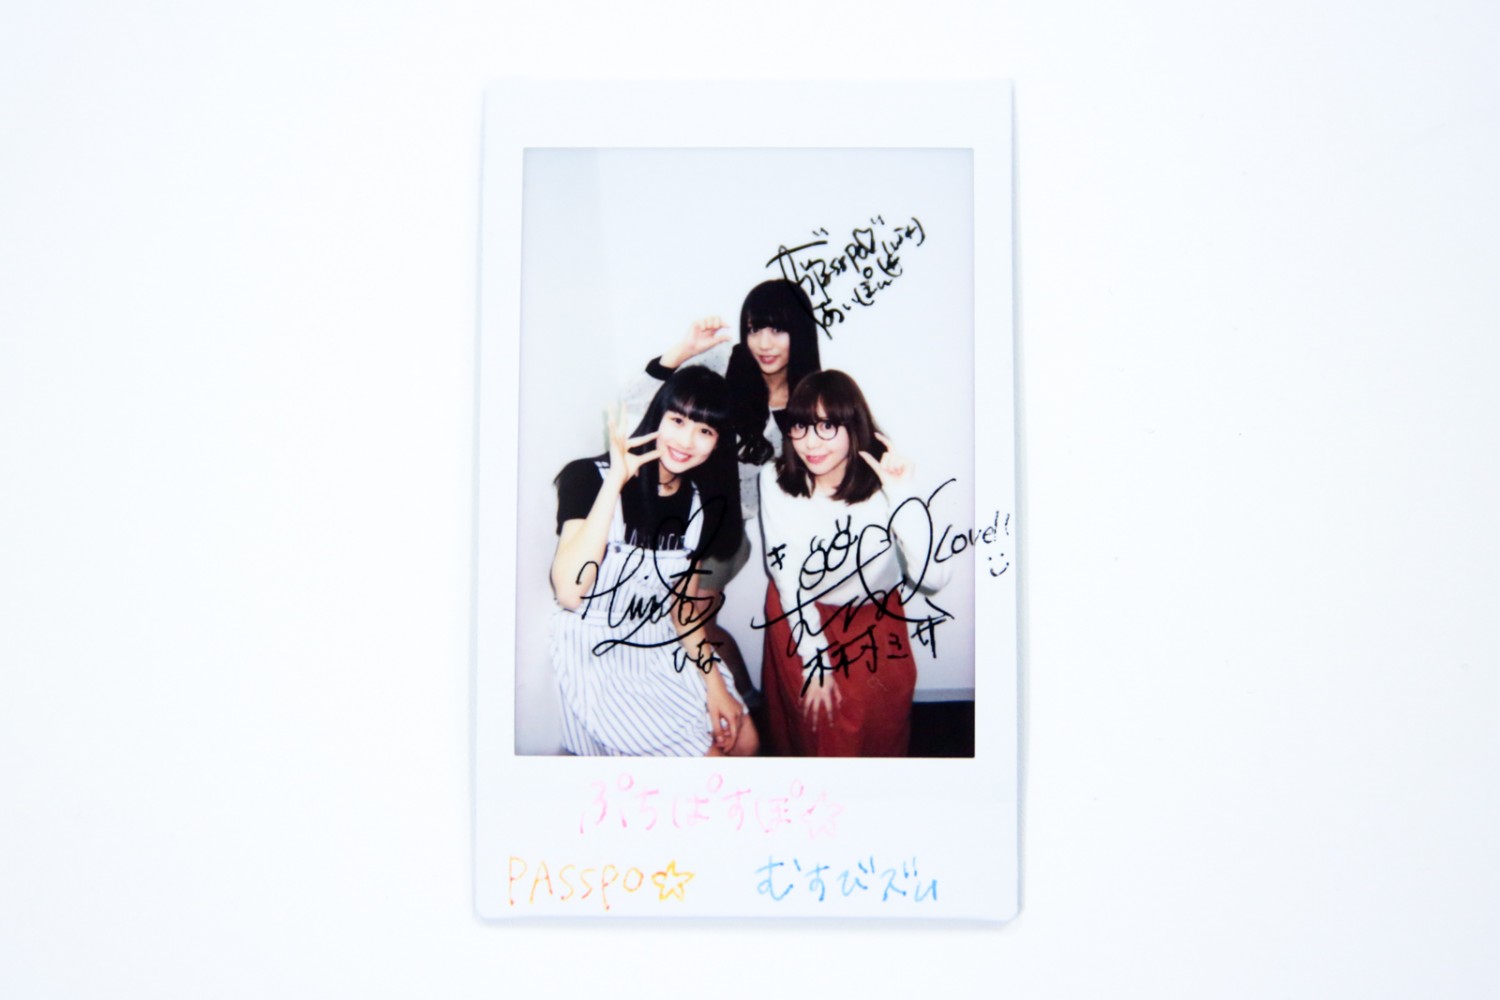 A rare cheki with autographs for 1 lucky winner!